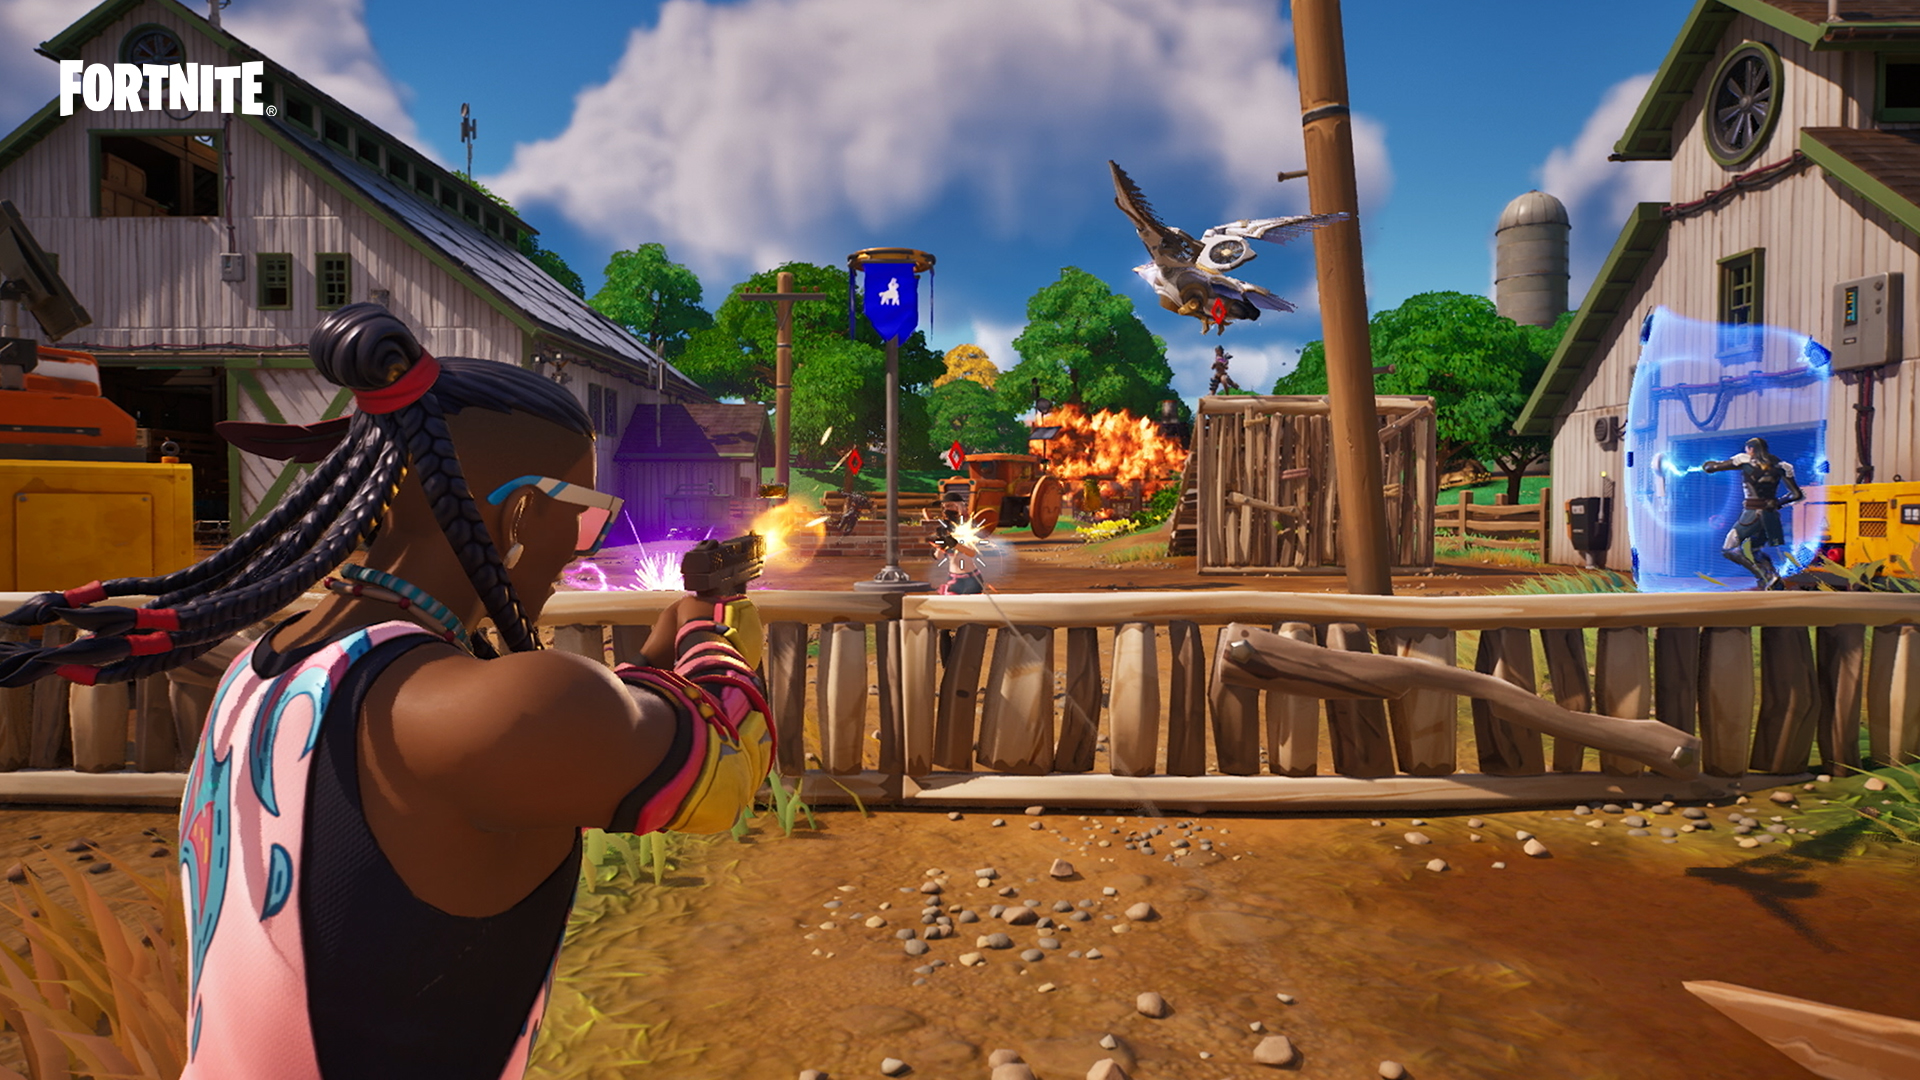 PlayStation onto a new island in Fortnite Chapter 4 Season live today. Includes new Unreal Engine 5 visual enhancements. Full details